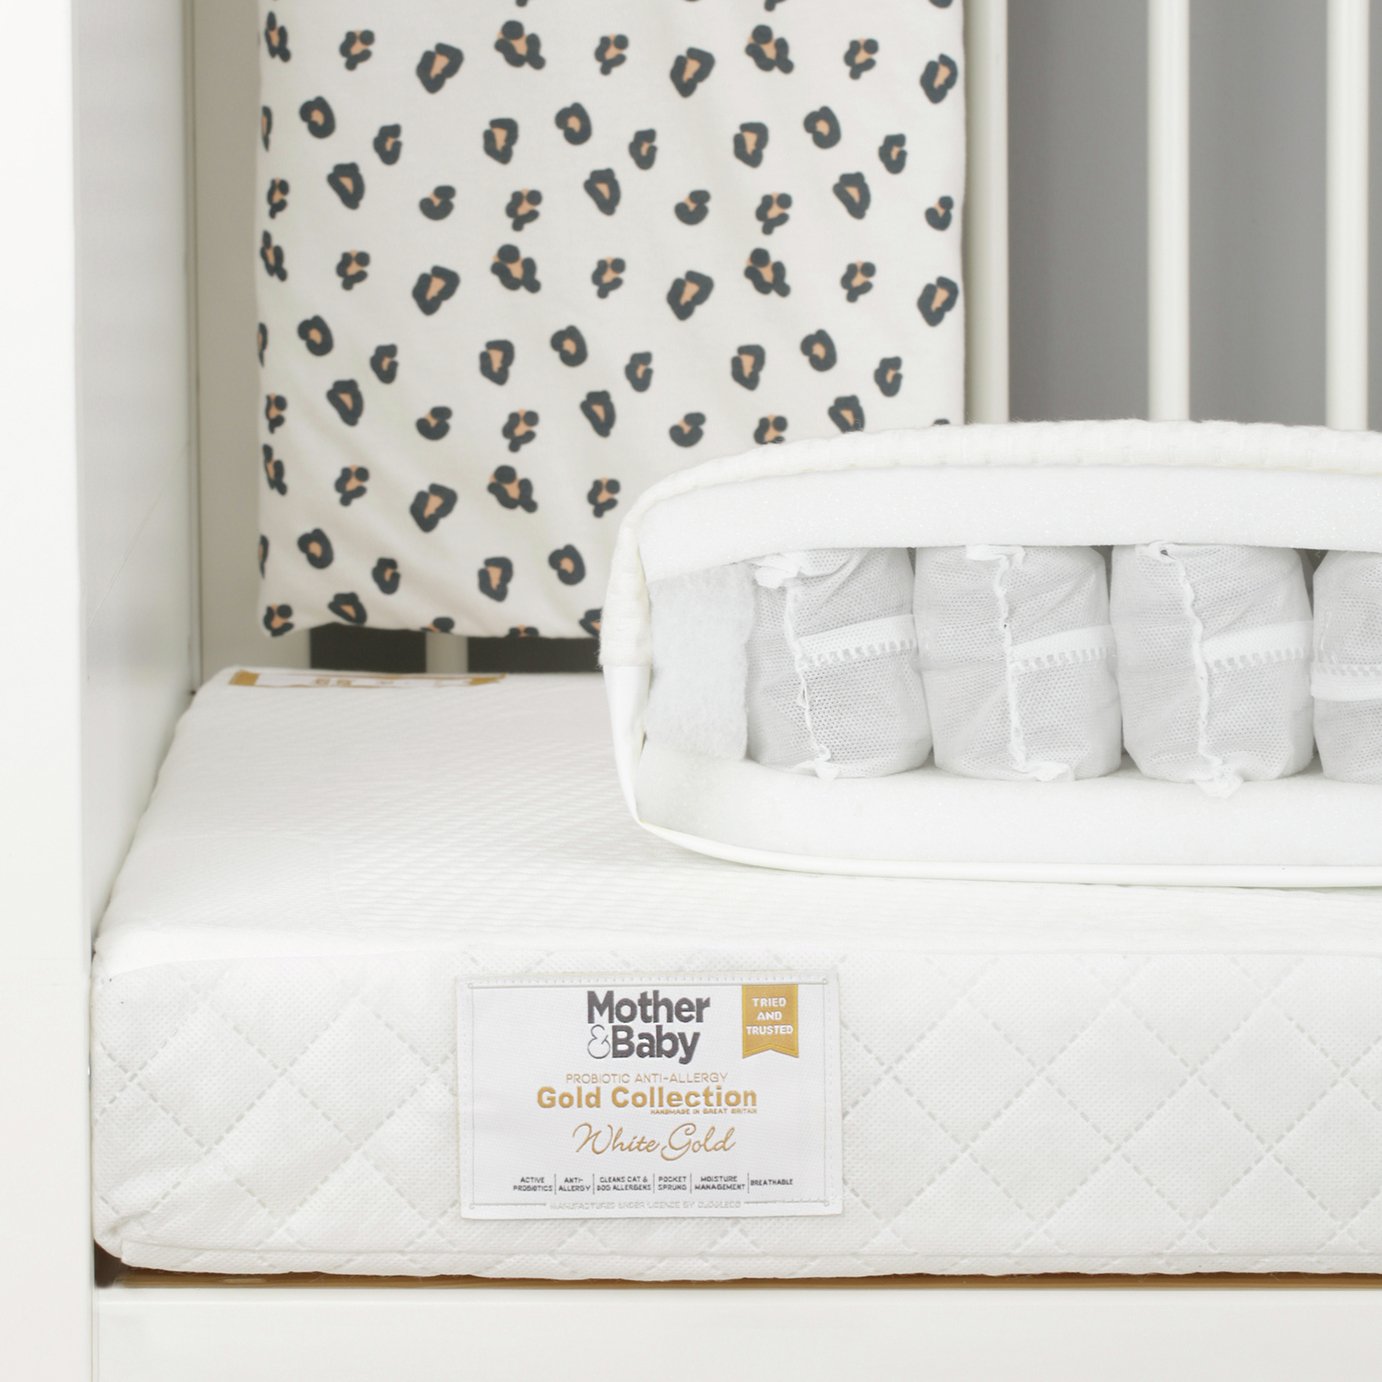 Mother&Baby 140 x 70cm Anti-Allergy Pocket Cot Bed Mattress Review